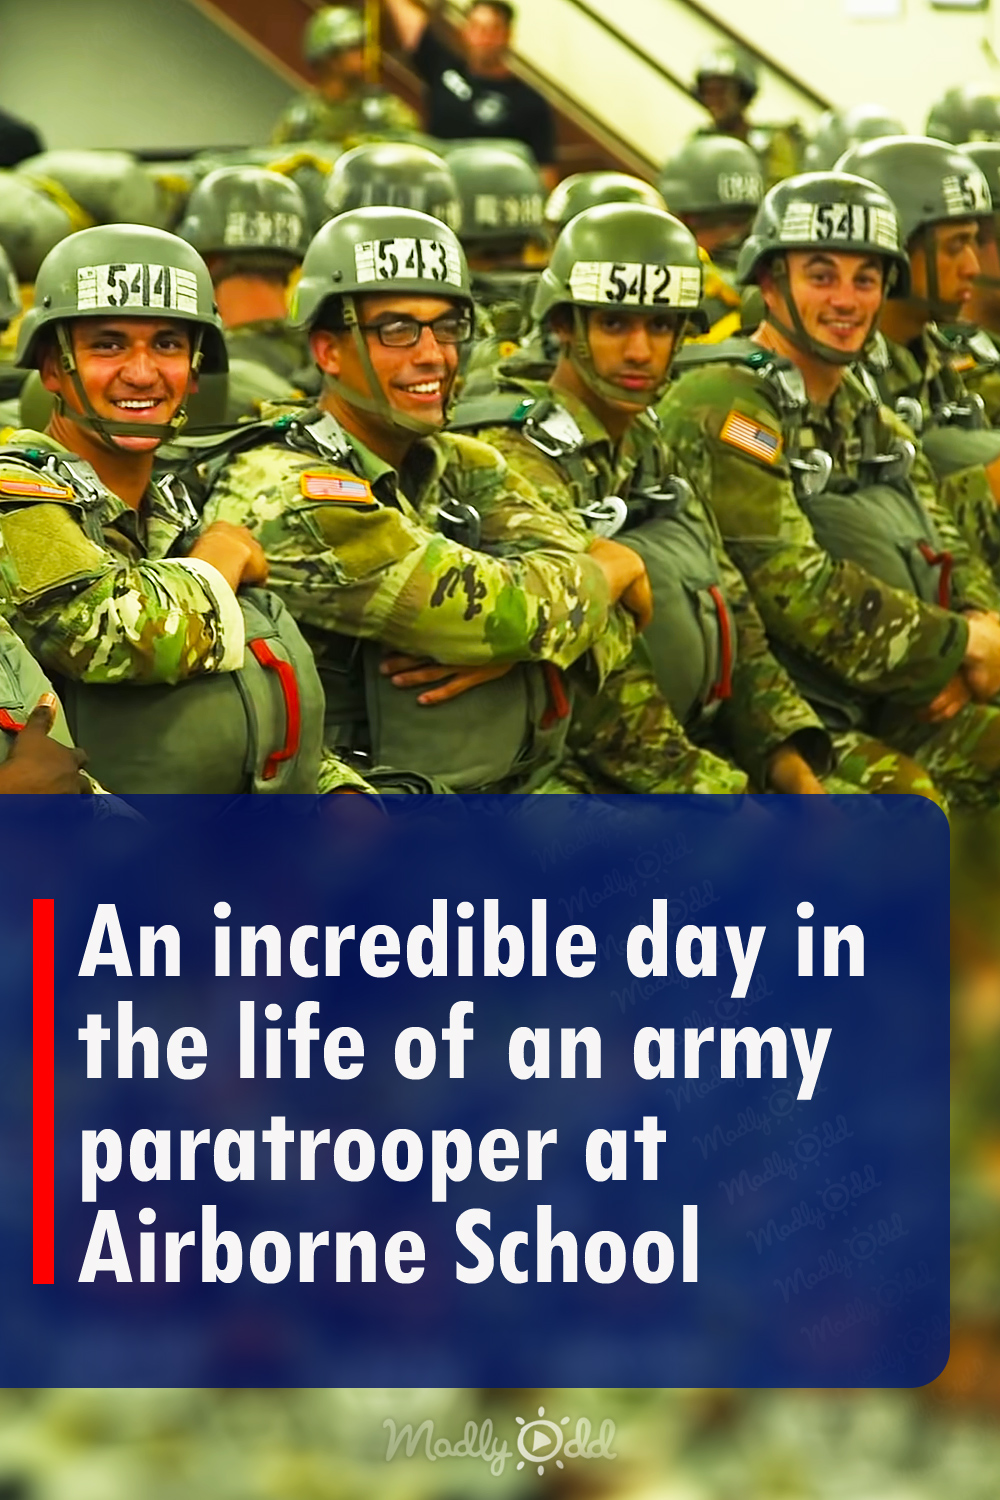 An incredible day in the life of an army paratrooper at Airborne School